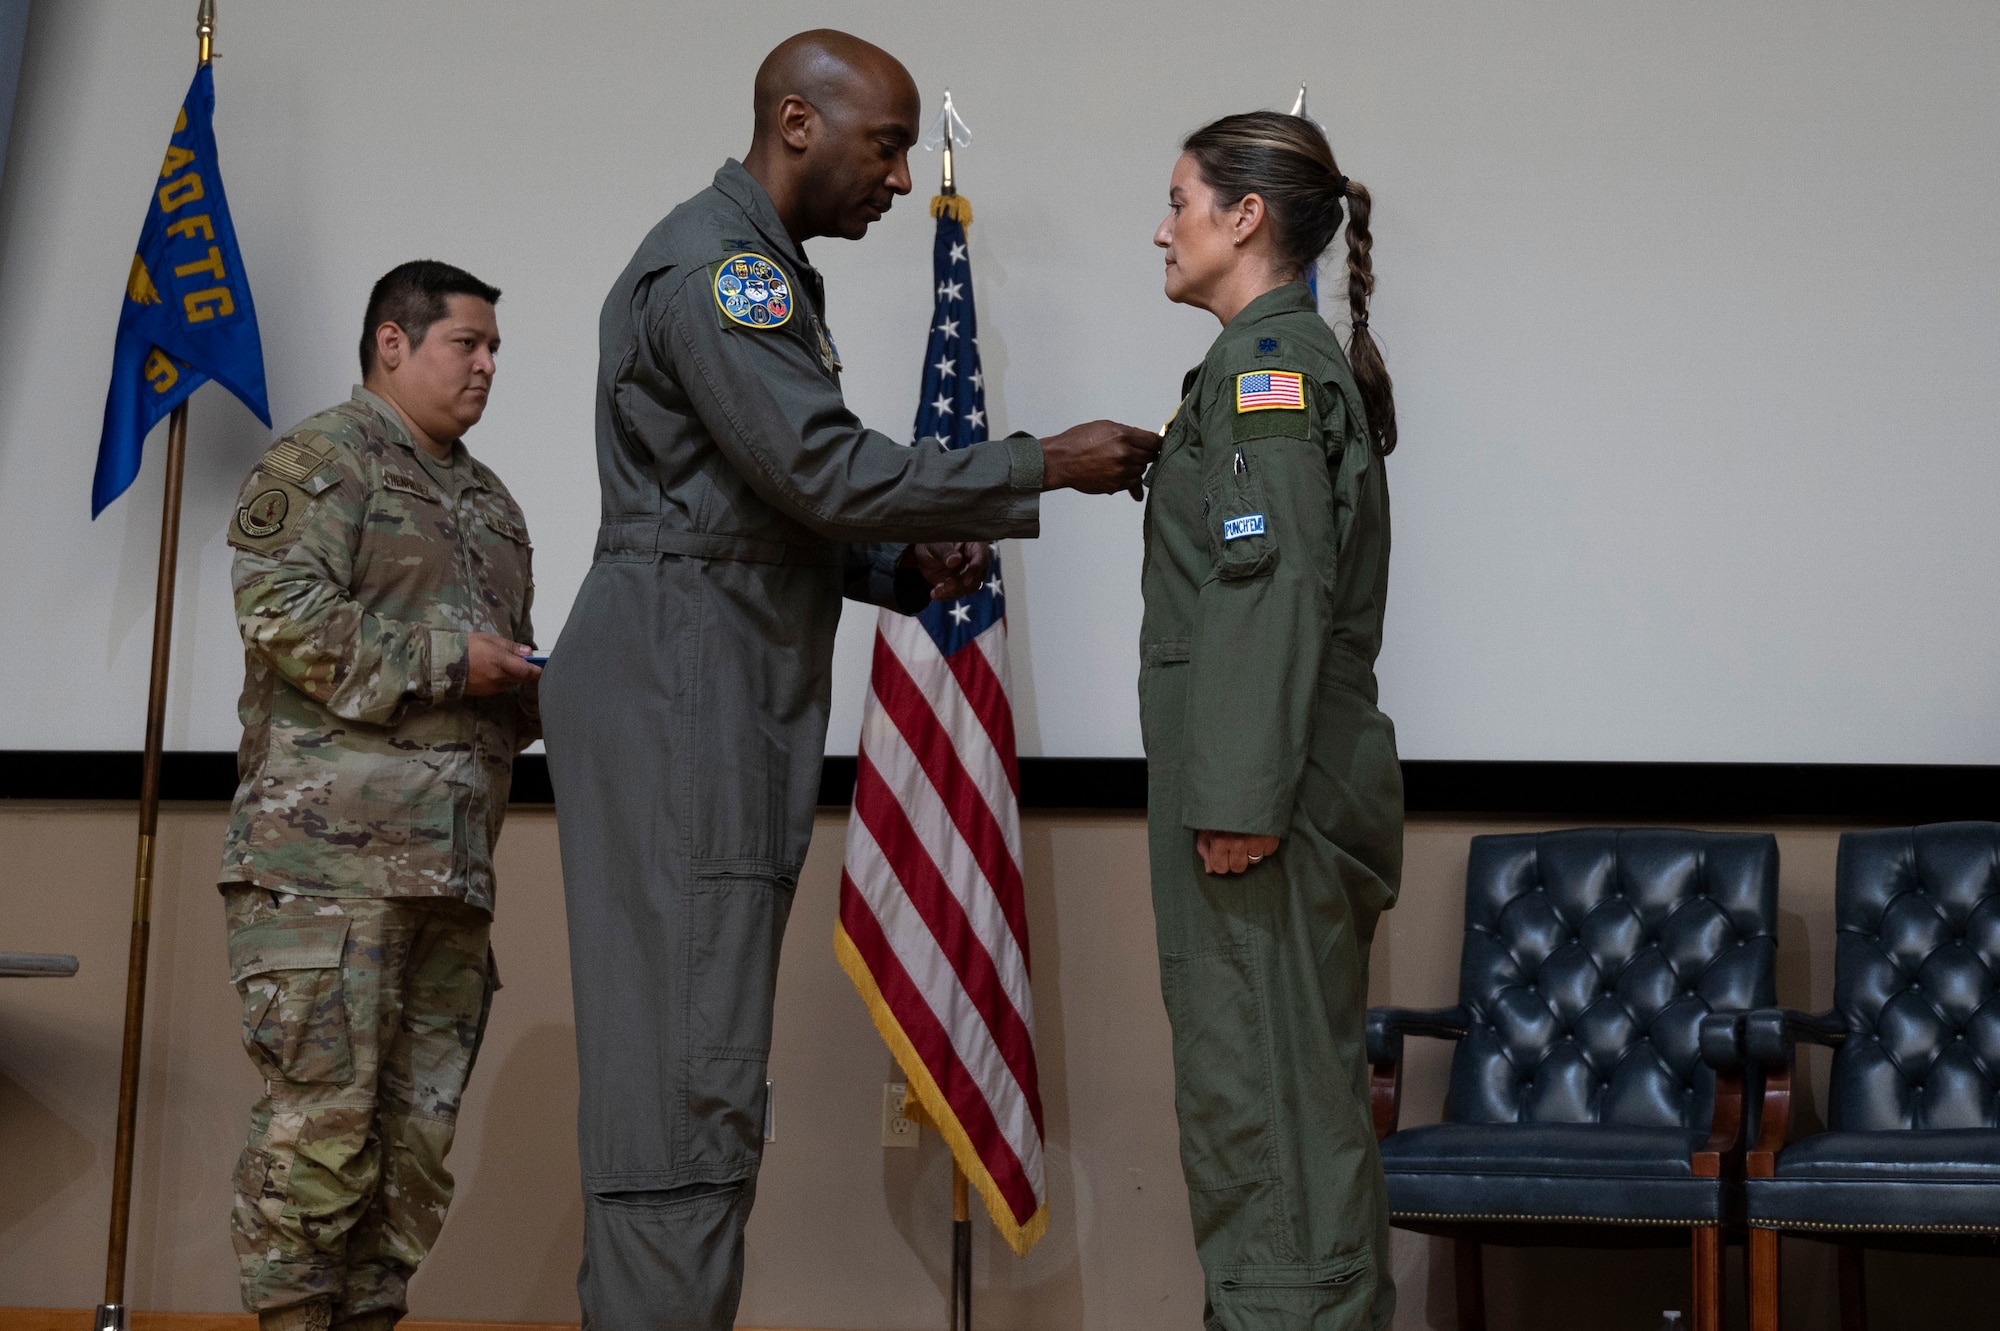 U.S. Air Force Col. Michael McMillan, 340th Flying Training Group director of operations, pins a Meritorious Service Medal onto Lt. Col. Christine Van Weezendonk’s flight suit, former 96th Flying Training Squadron commander, during the 96th FTS change of command ceremony at Laughlin Air Force Base, Texas, May 10, 2024. The Meritorious Service Medal was established as the counterpart of the Bronze Star Medal for the recognition of meritorious noncombatant service. (U.S. Air Force photo by Senior Airman Kailee Reynolds)